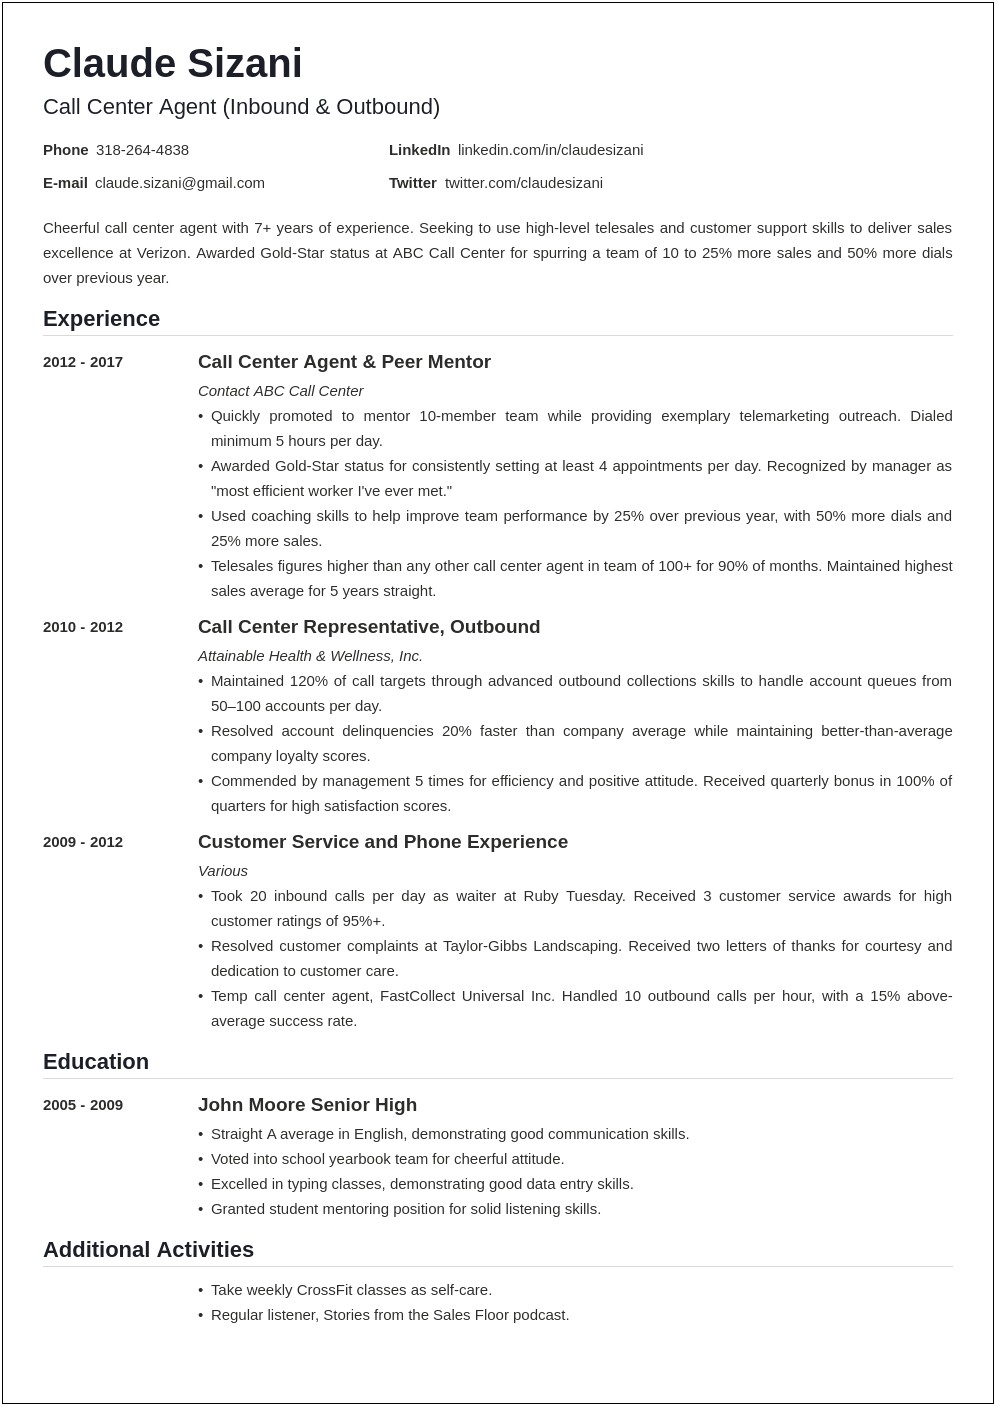 Resume Template For Staying At Same Complany